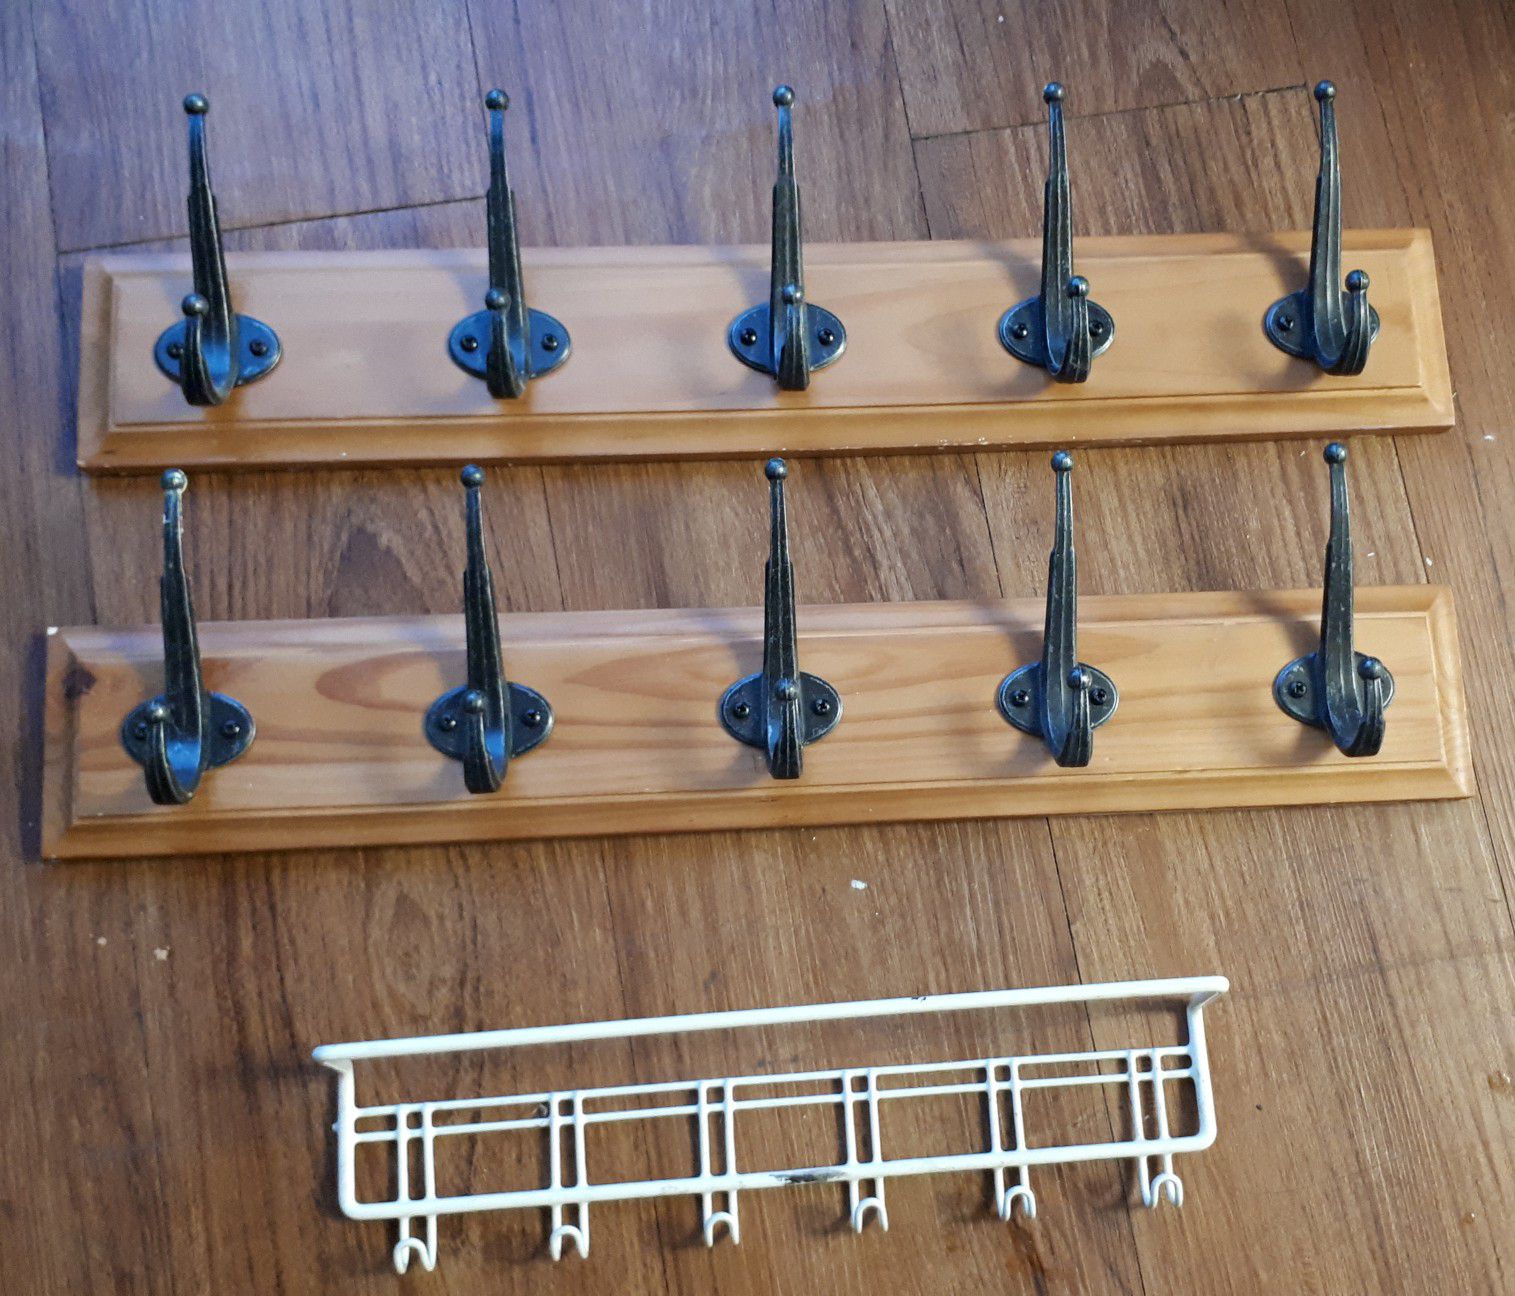 All Those Heavy Duty and Weight Wall Hooks for 5$